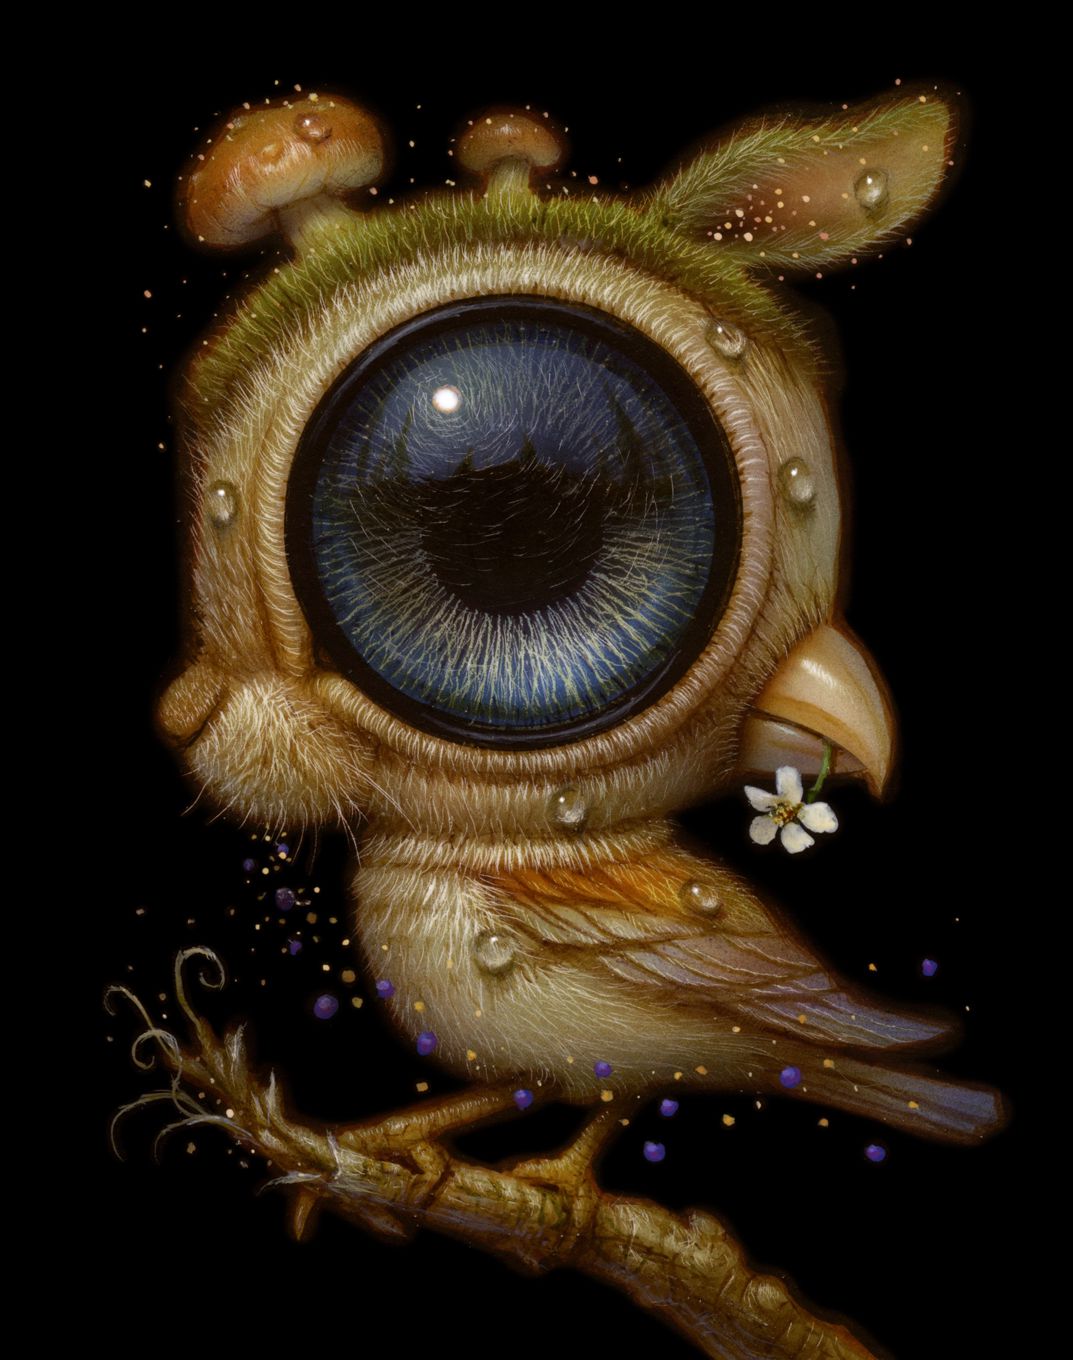 Quirky Fantastical Creatures With Oversized Eyes By Haoto Nattori 11